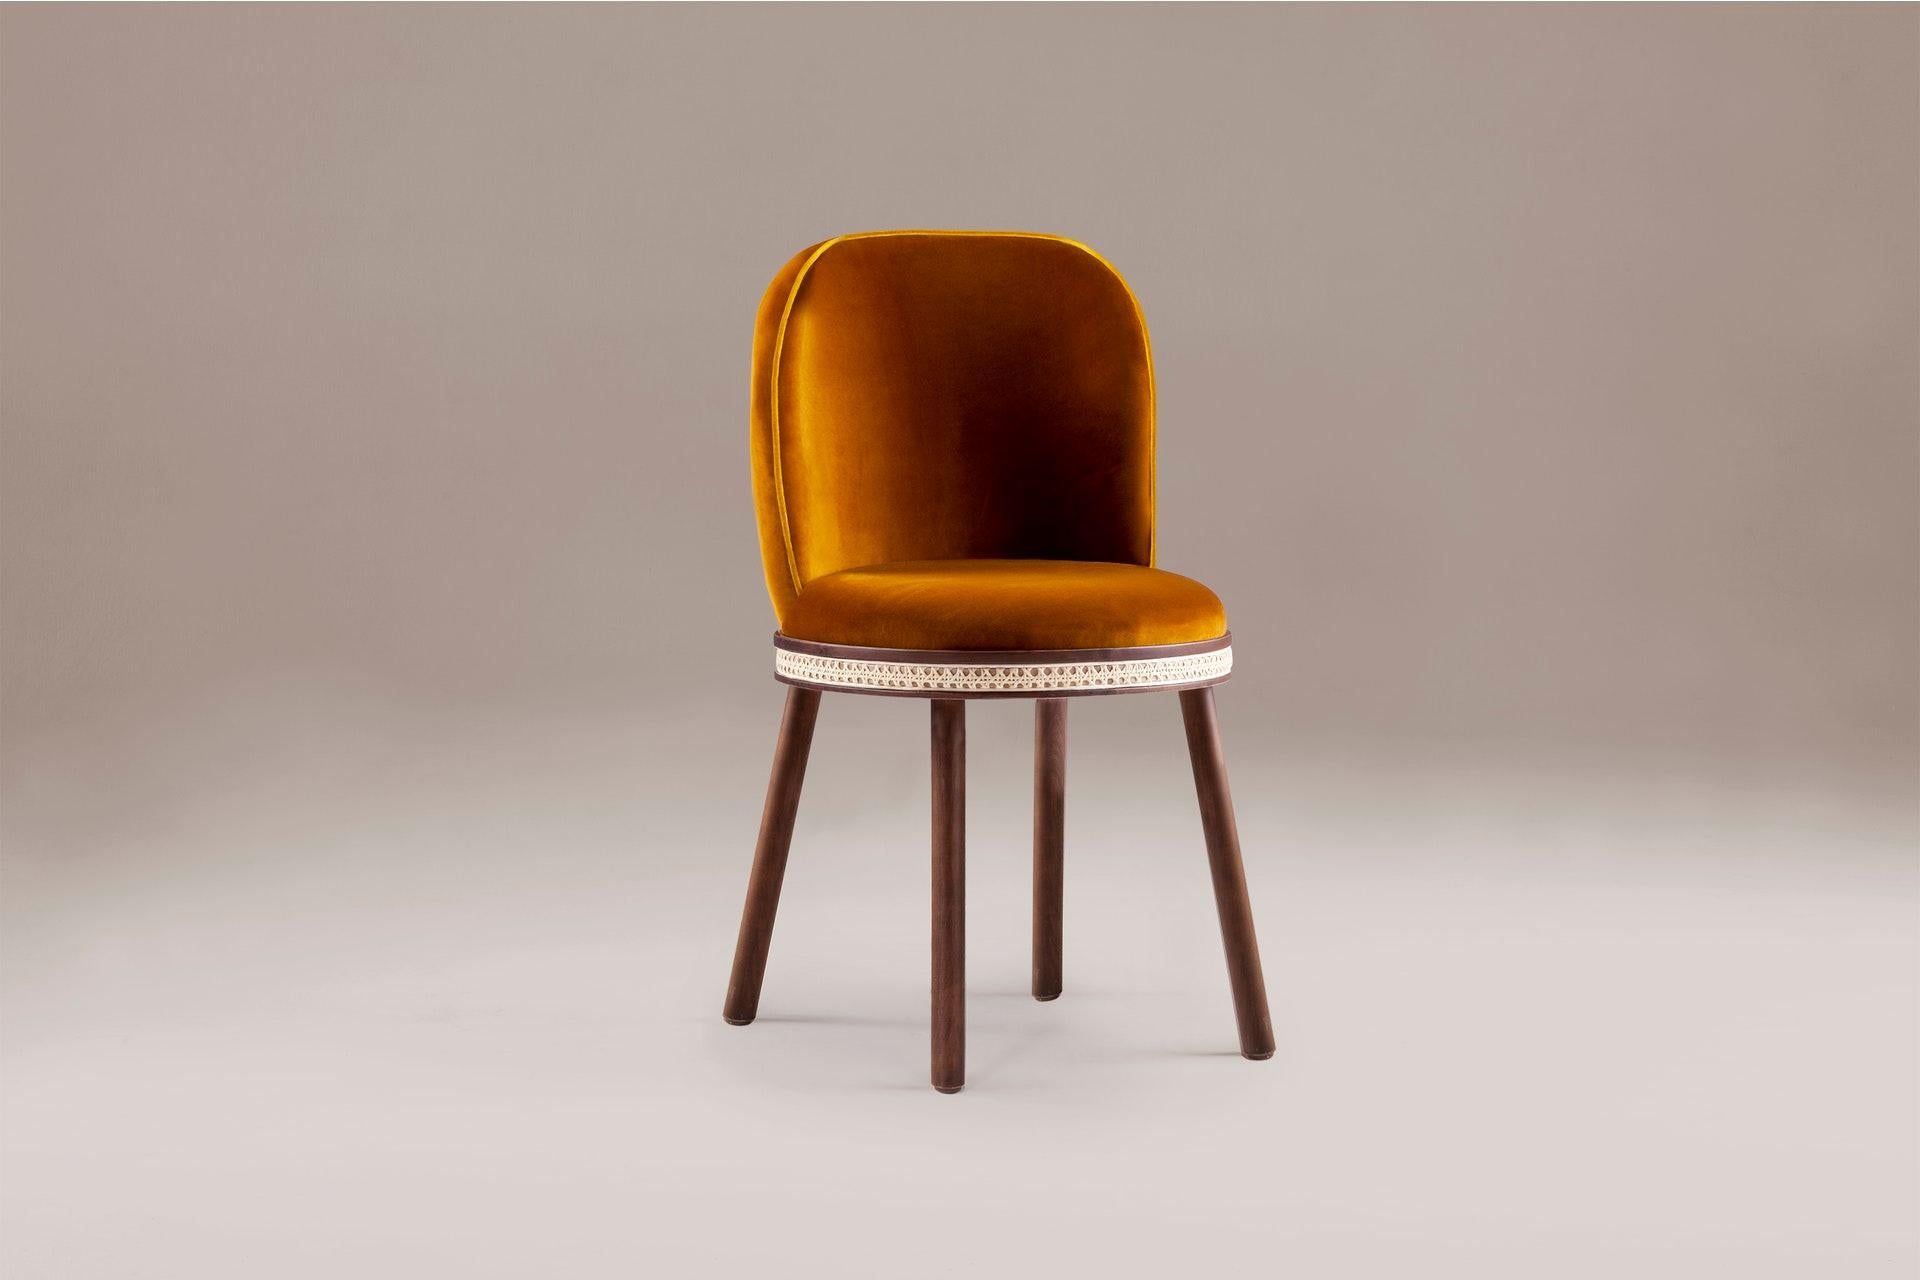 DOOQ Mid-Century Modern Dinning Chair Alma Deep Orange Velvet, Walnut Woods Legs

In a piece that combines classic and modern aesthetics we can find a certain harmonic gracefulness paired with an intimate voluptuousness that can embrace you and